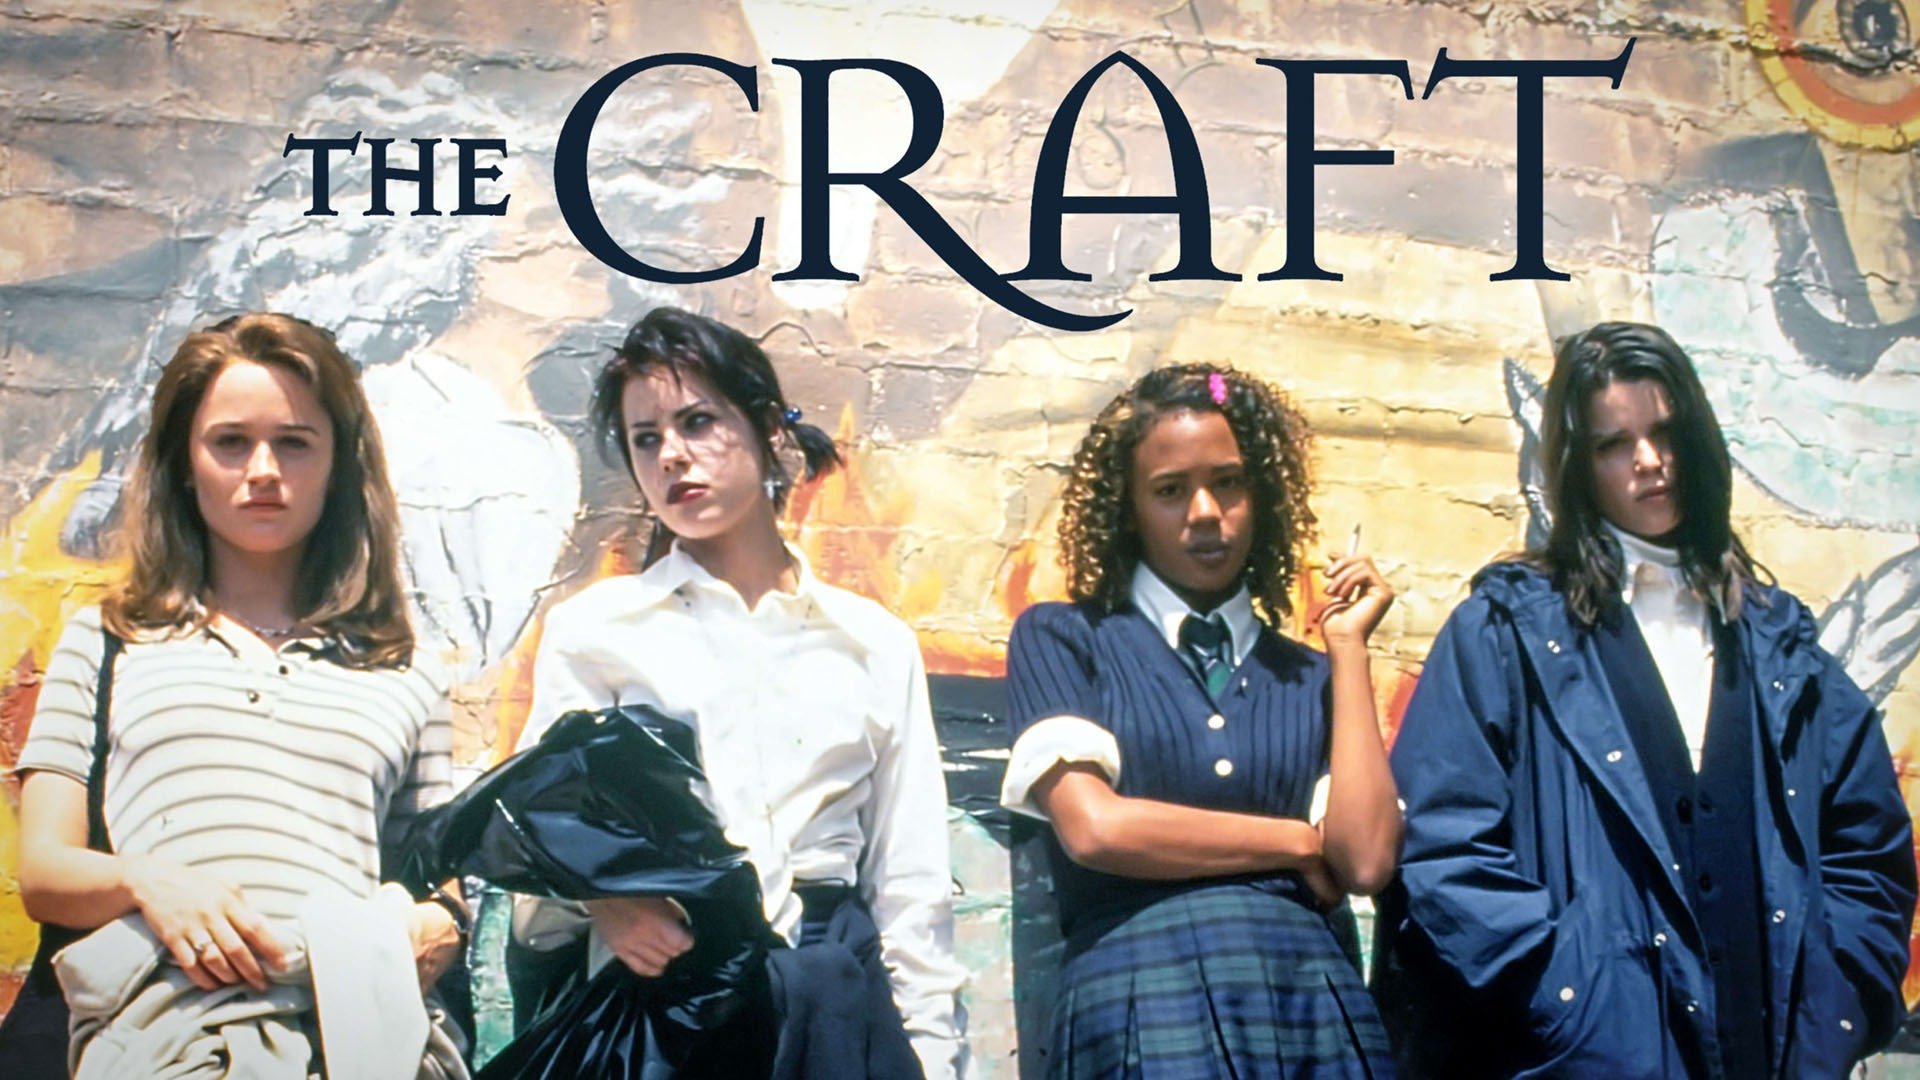 The Craft: Trailer 1 - Trailers & Videos - Rotten Tomatoes